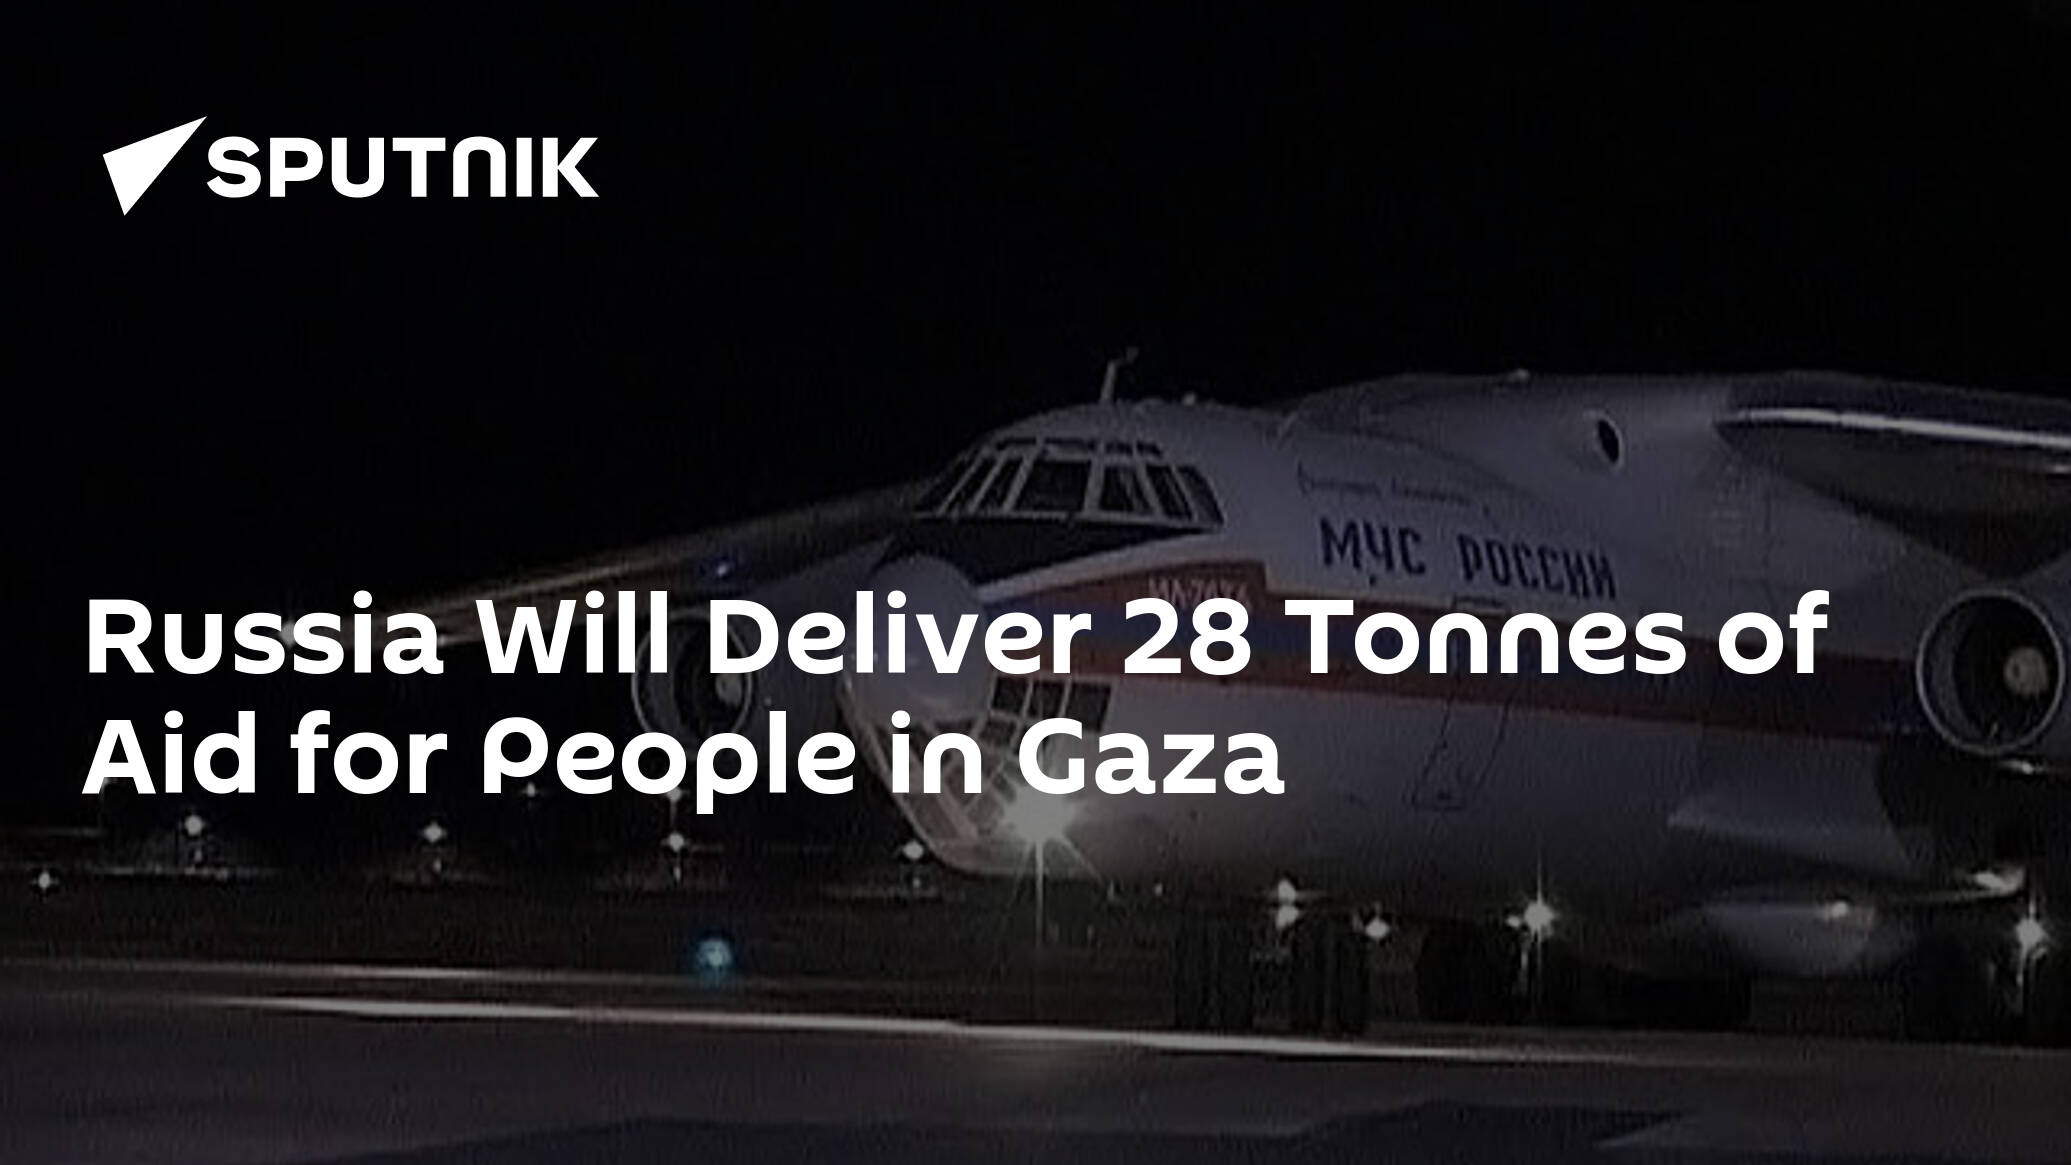 Russia Will Deliver 28 Tonnes of Aid for People in Gaza